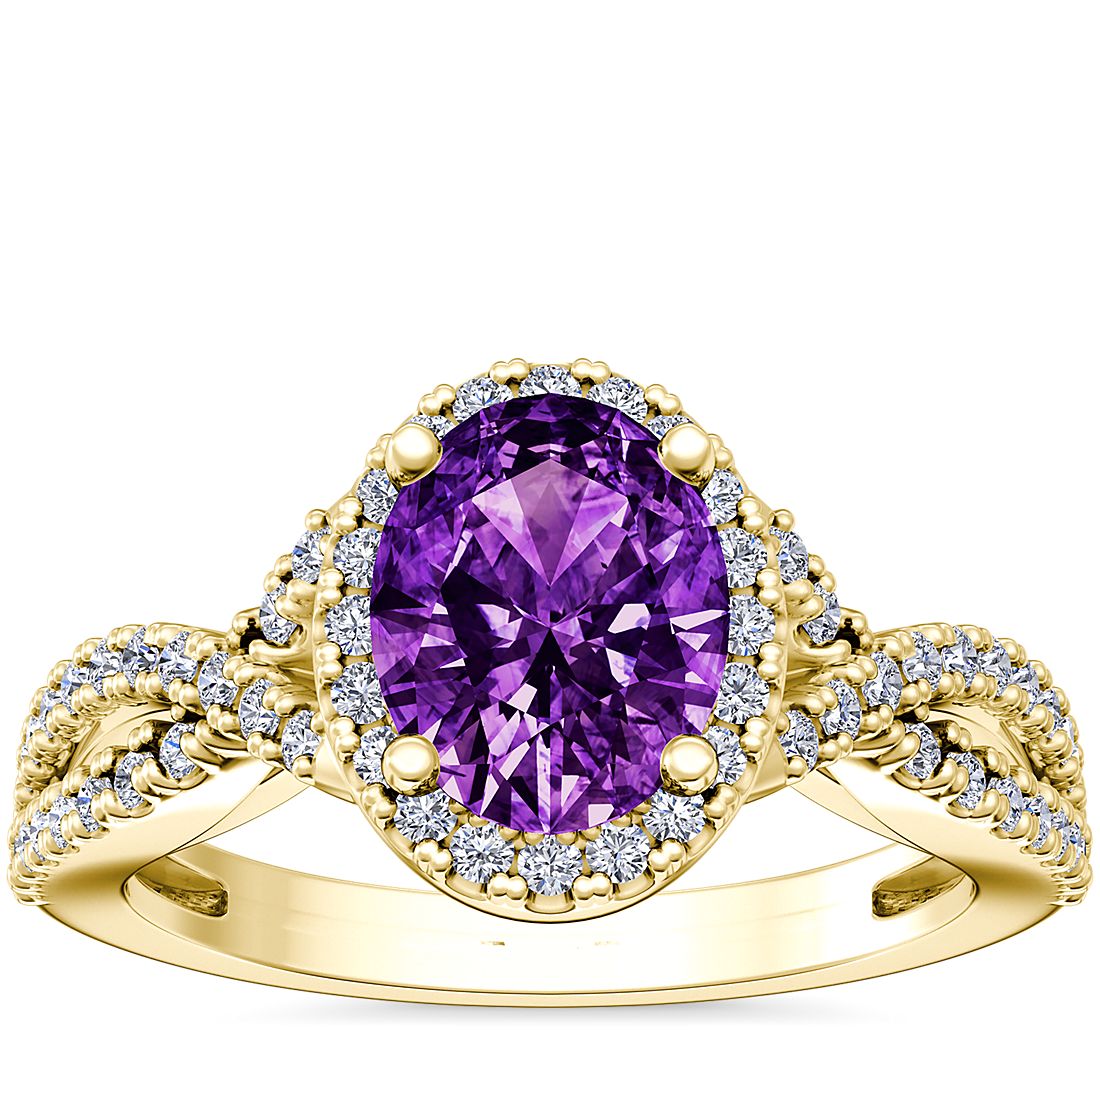 Twist Halo Diamond Engagement Ring with Oval Amethyst in 14k Yellow Gold (9x7mm)